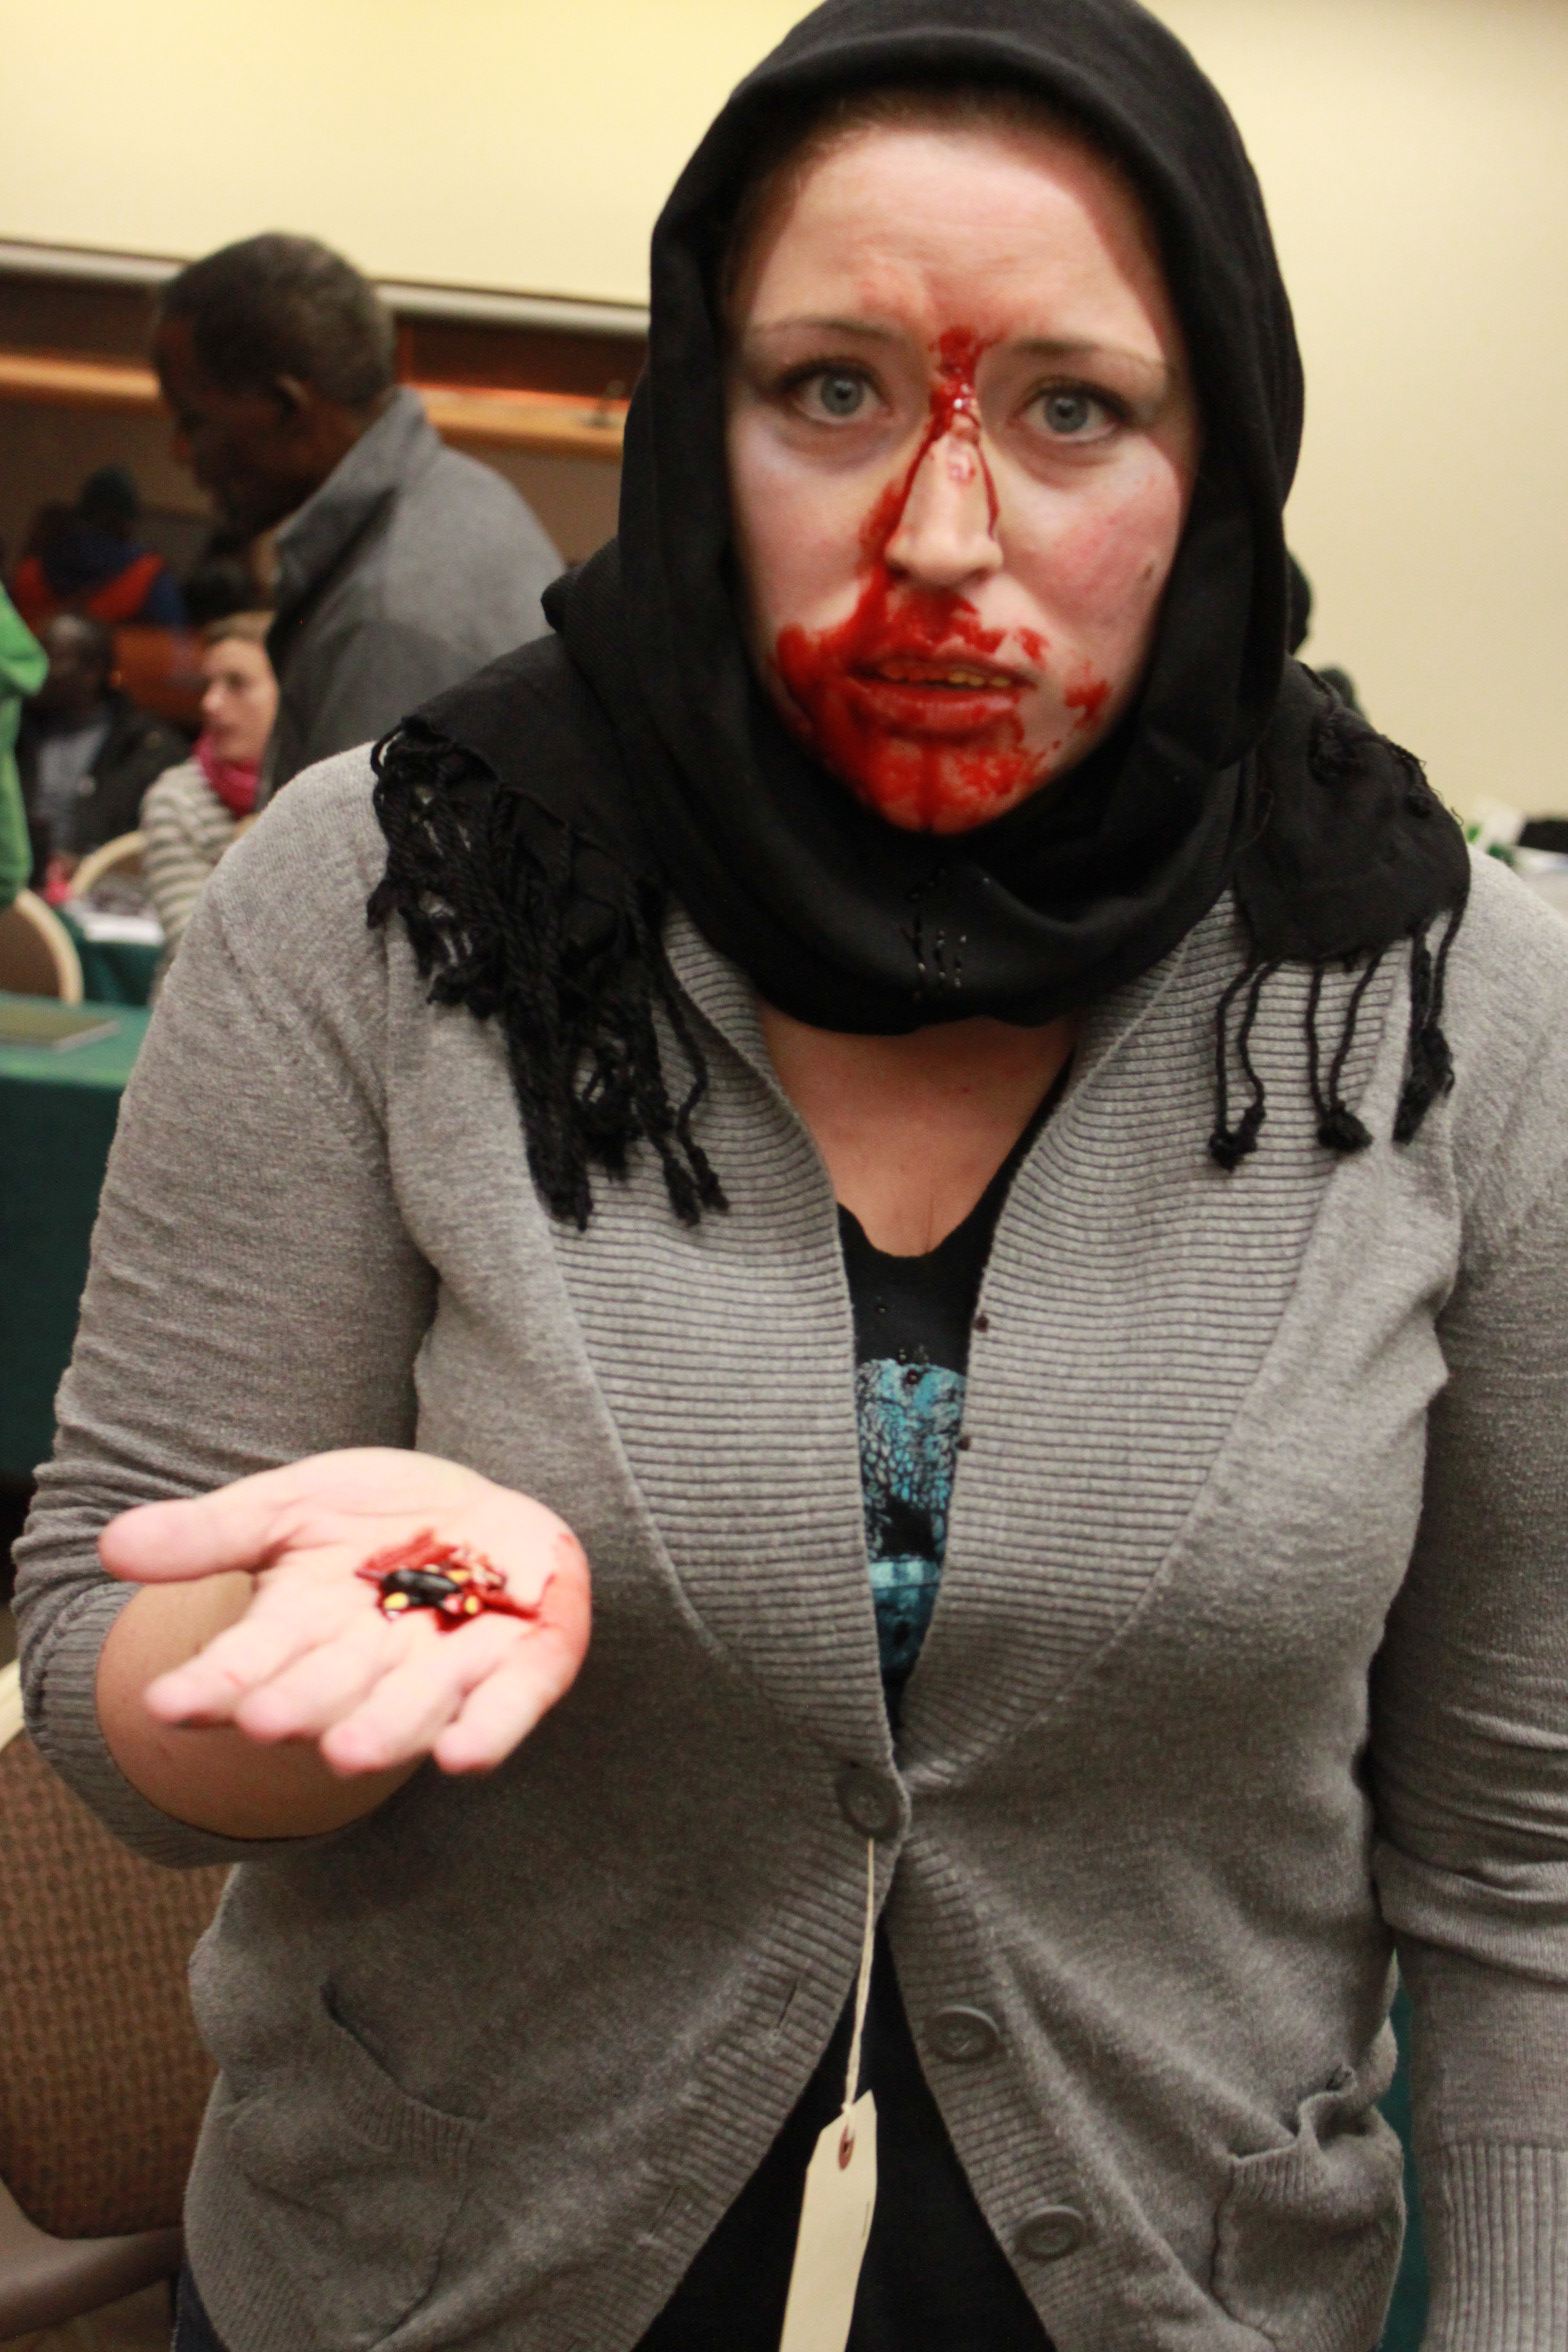 The final costume! She is holding teeth that have been knocked out. The victims are made to appear as real as possible.